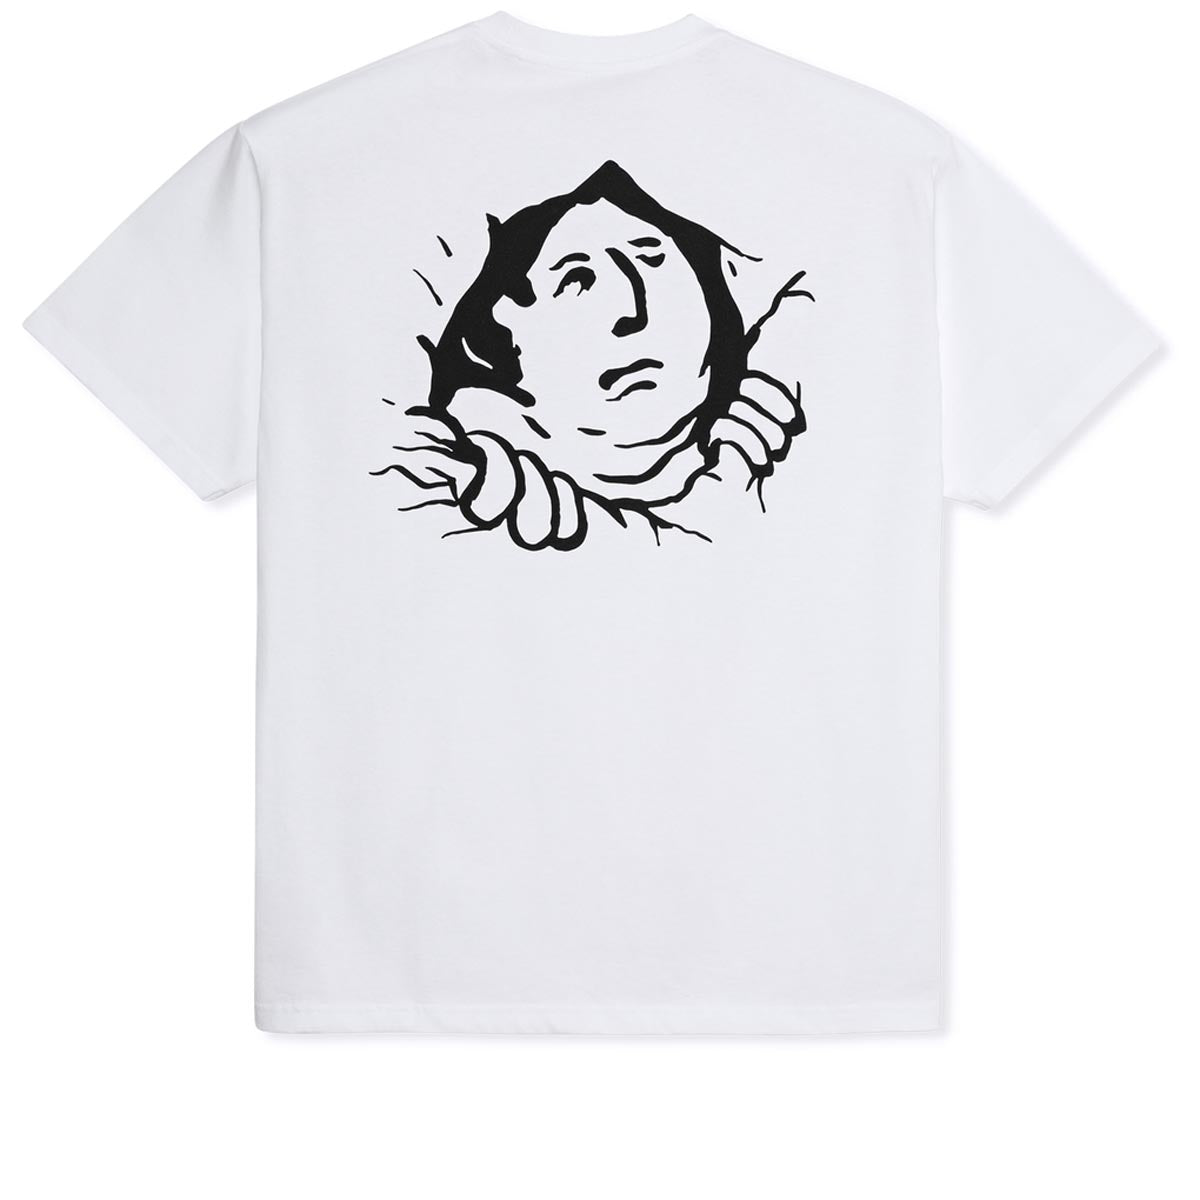 Polar Coming Out T-Shirt - White image 1